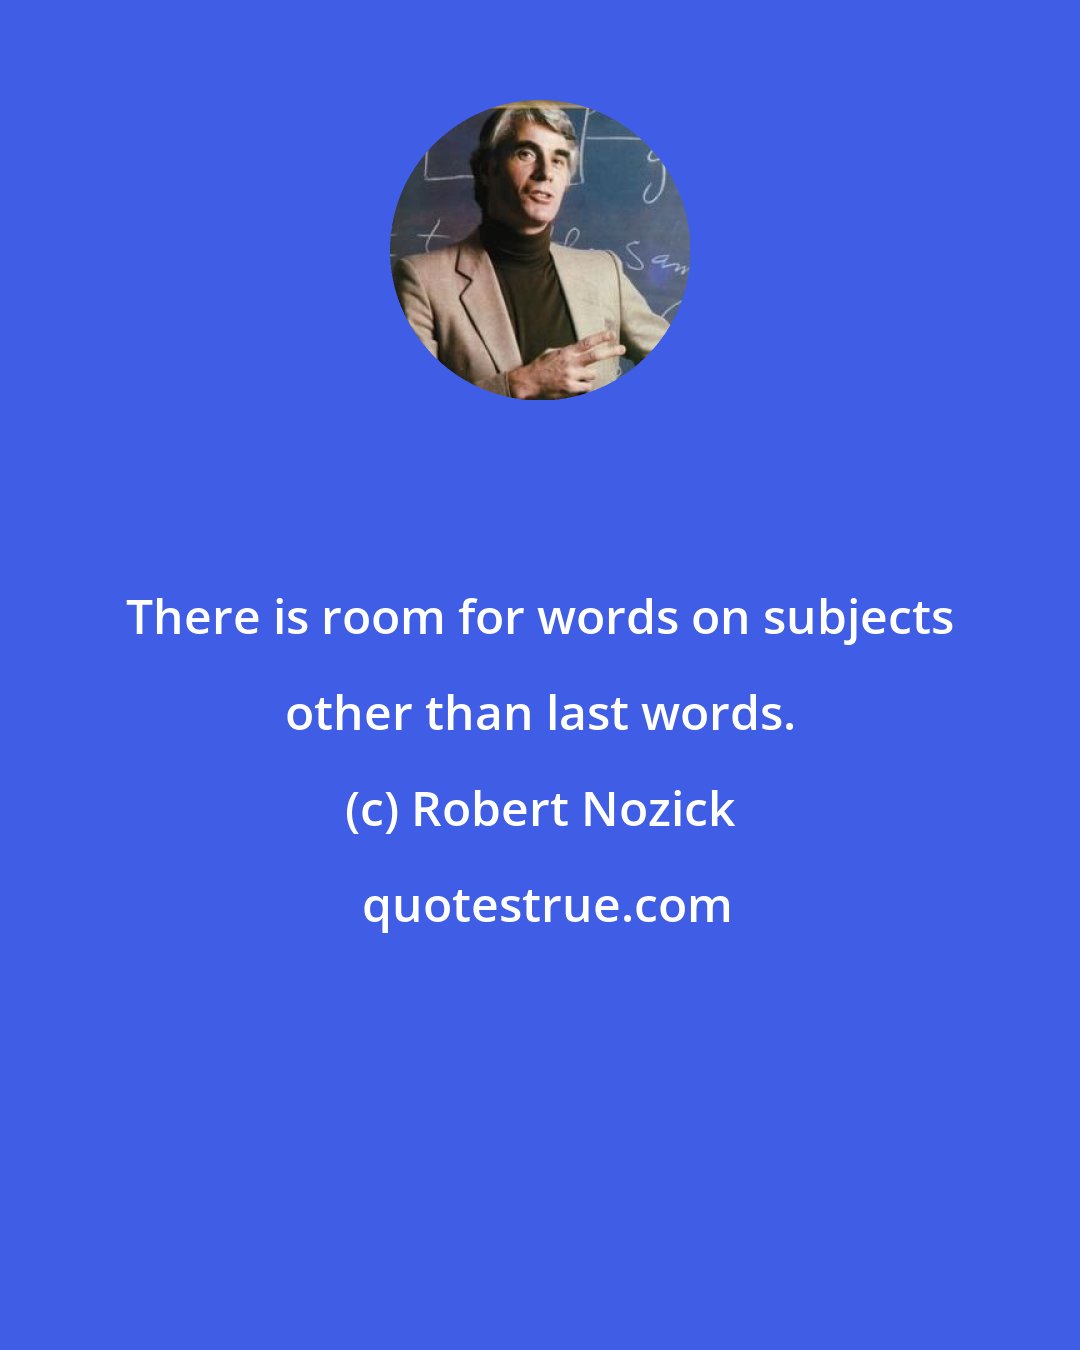 Robert Nozick: There is room for words on subjects other than last words.